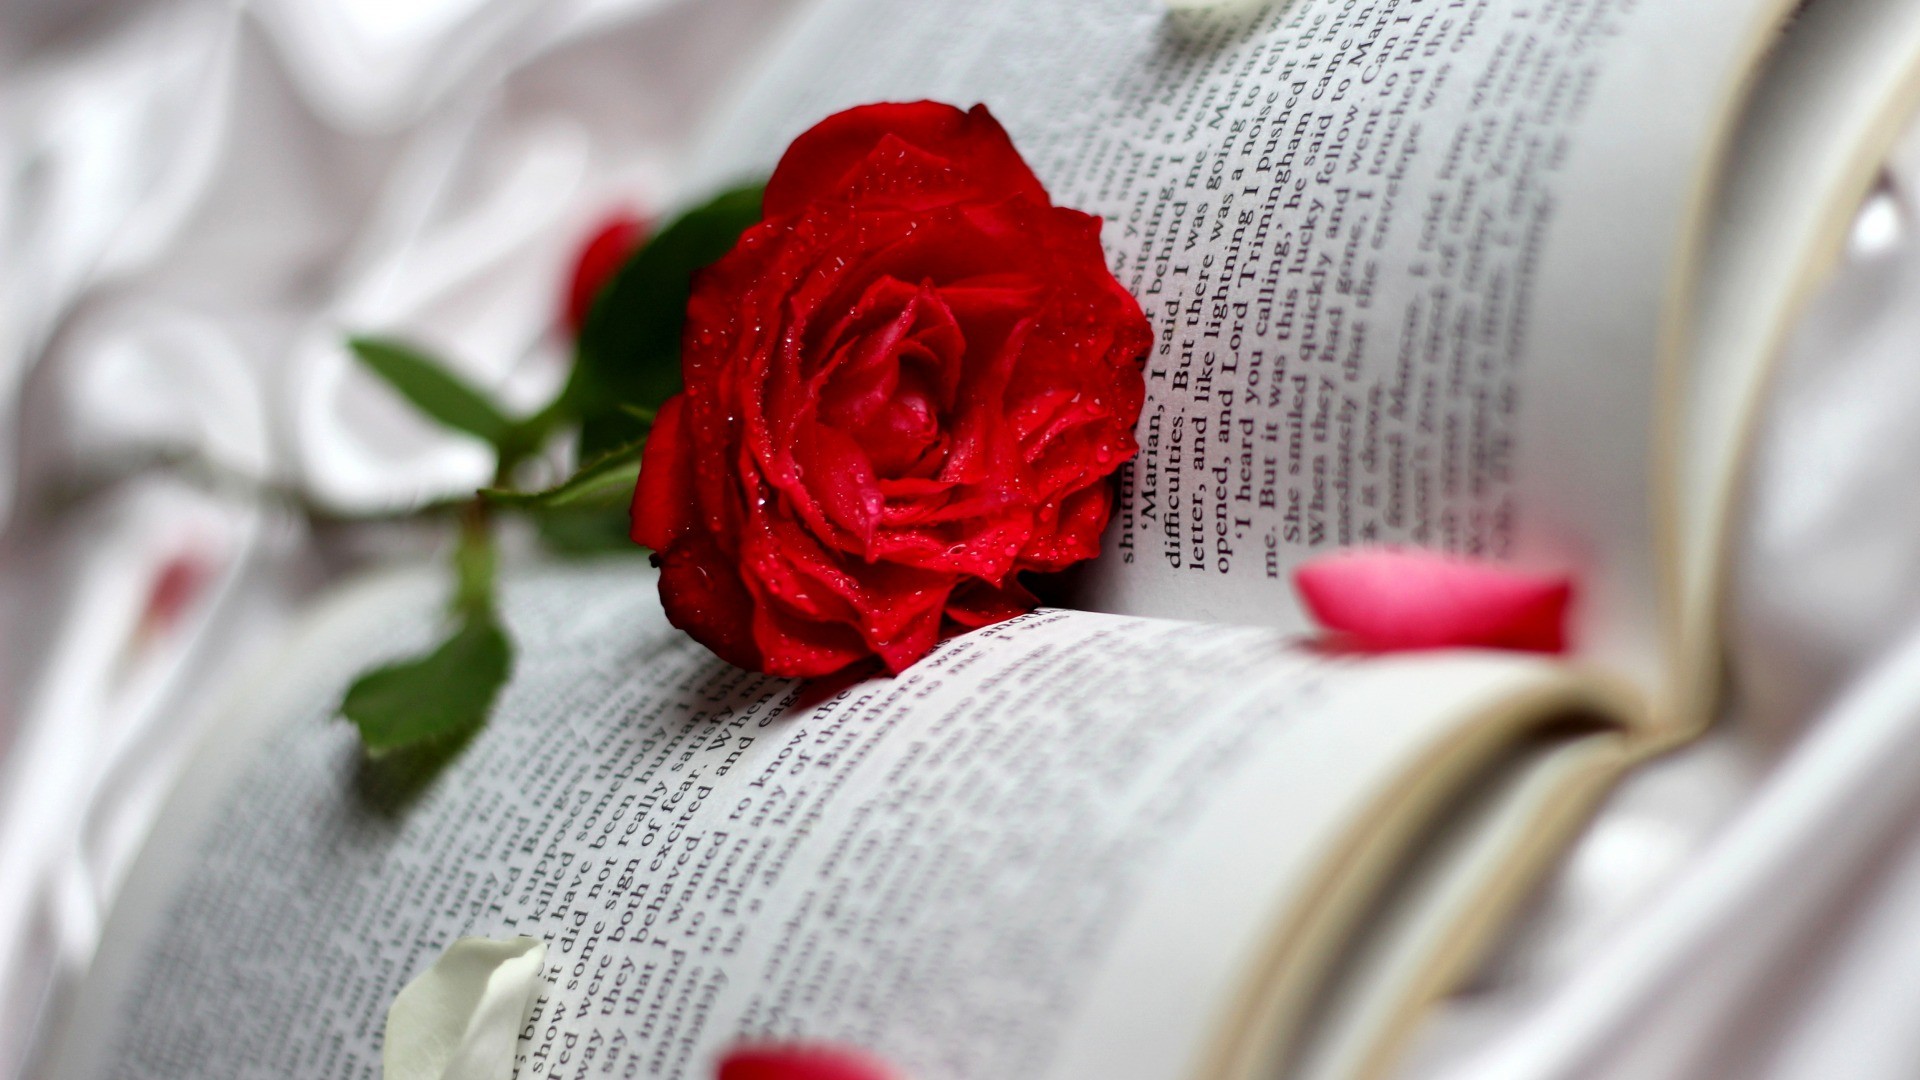 General 1920x1080 books flowers rose plants red flowers